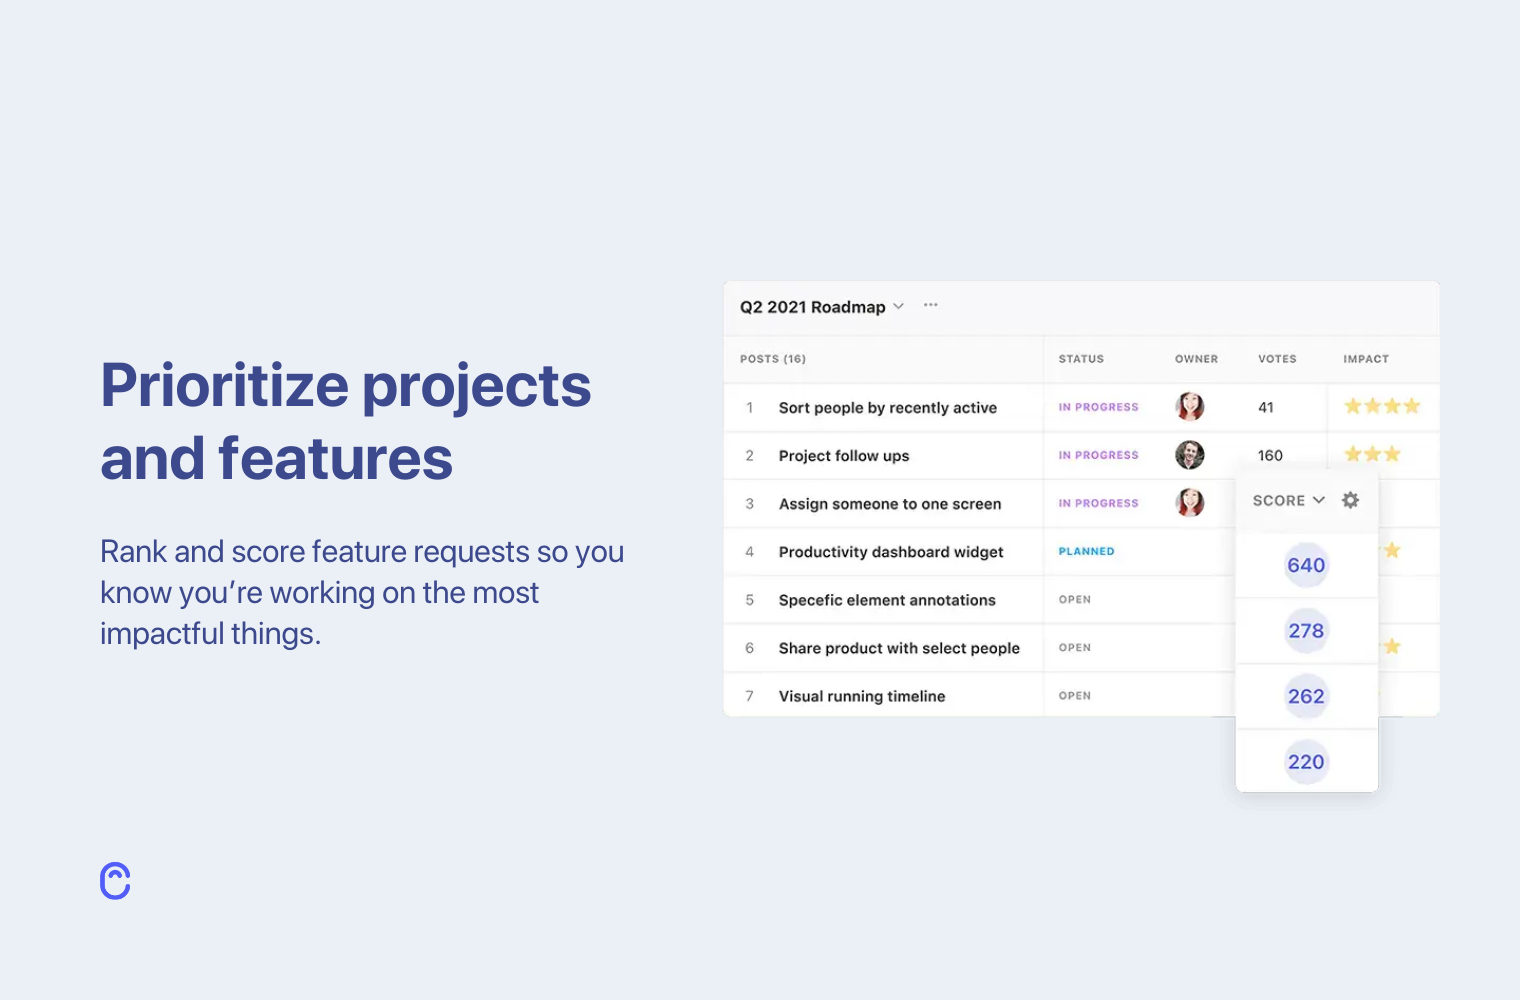 Rank and score feature requests so you know you're working on the most impactful things.